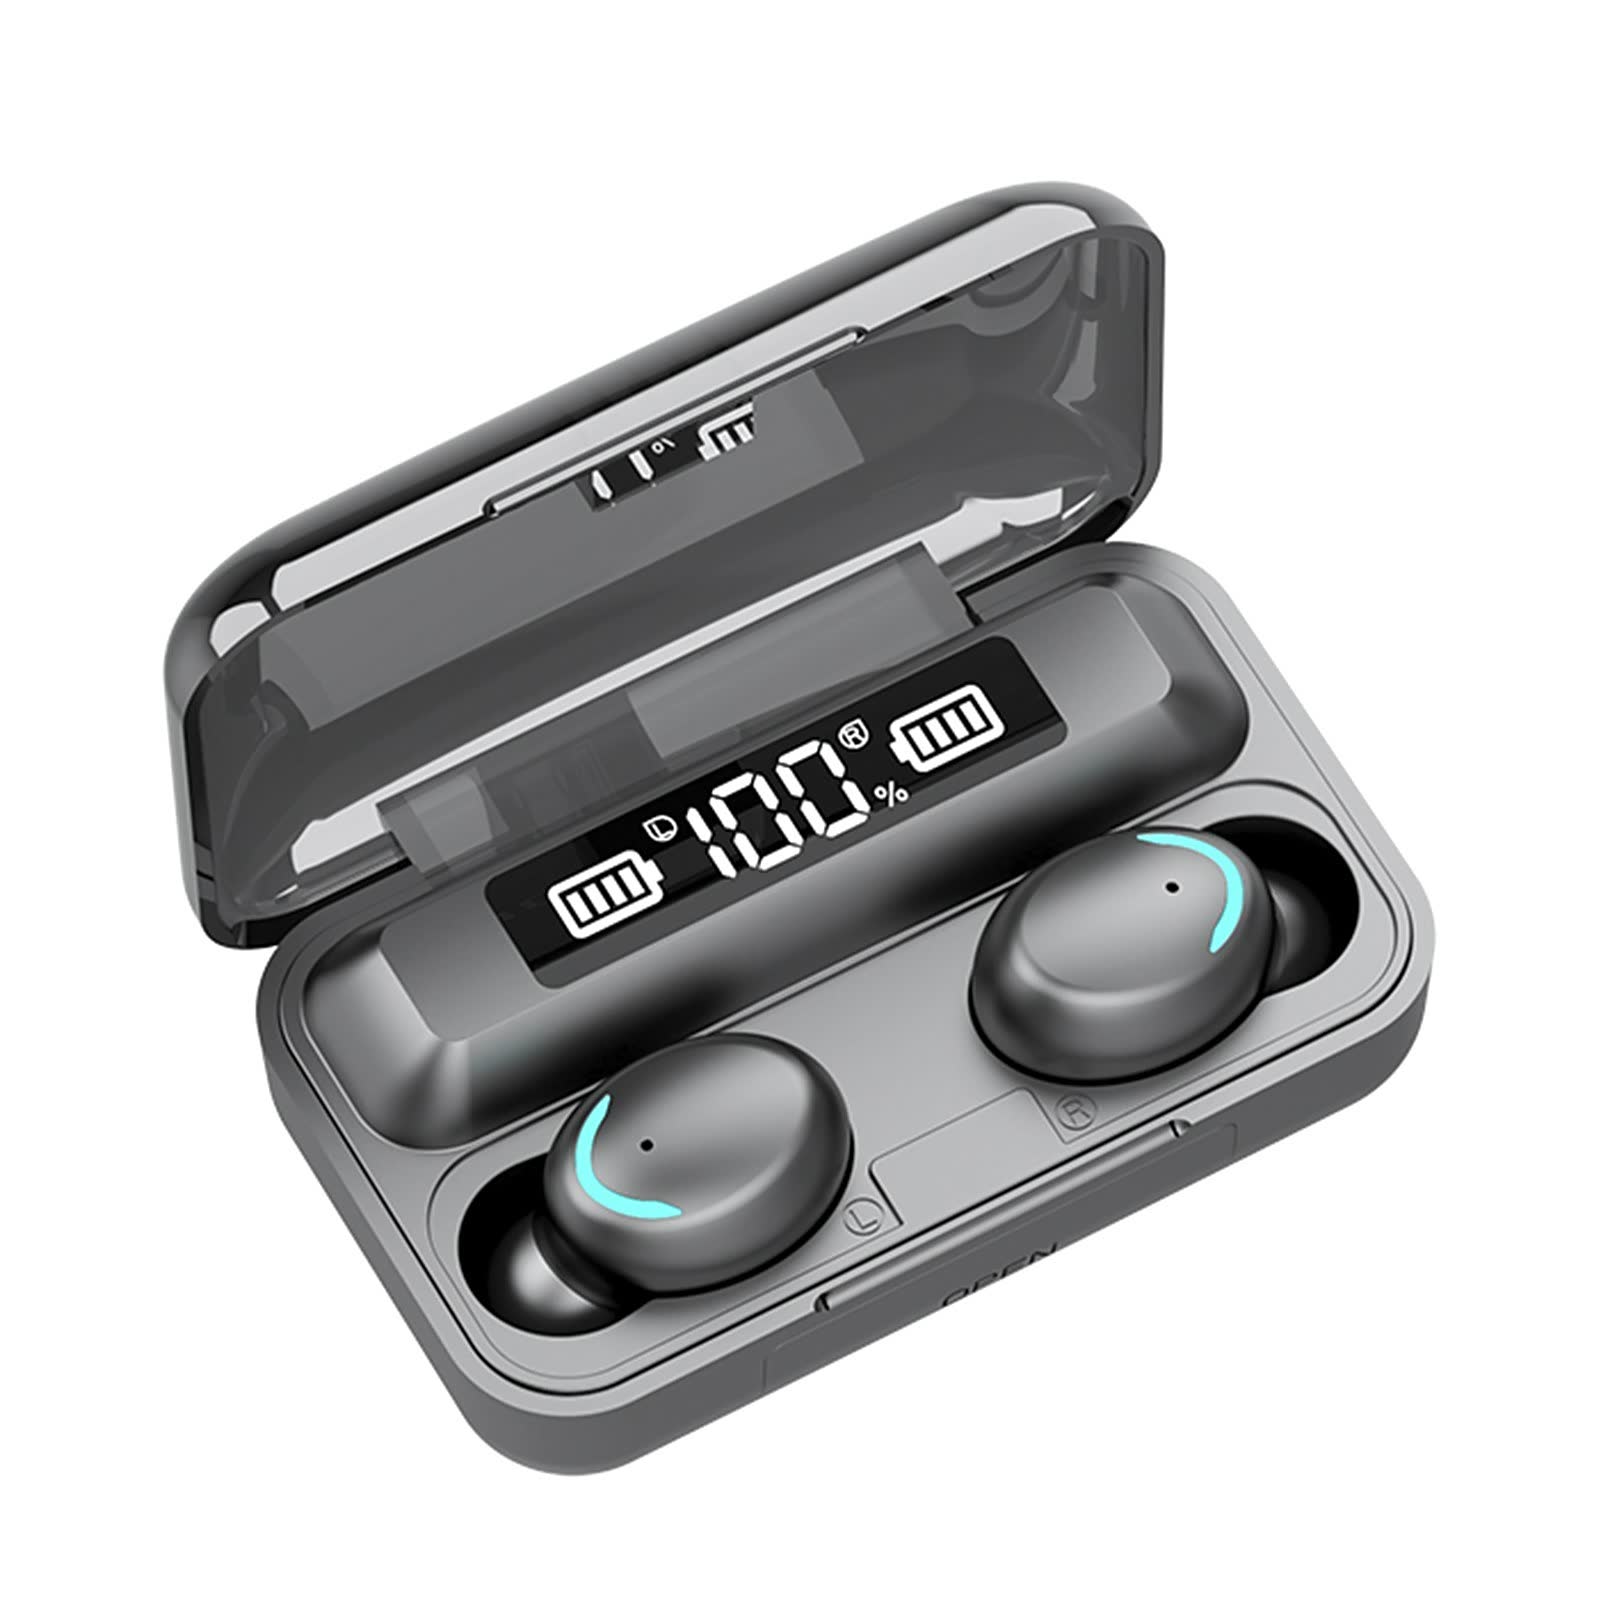 5.1 BT Connected Headset LEDs Sensitive Touching Binaural Speaker Built-in 1500mAh High Capacity Rechargeable Batterys Storage Box